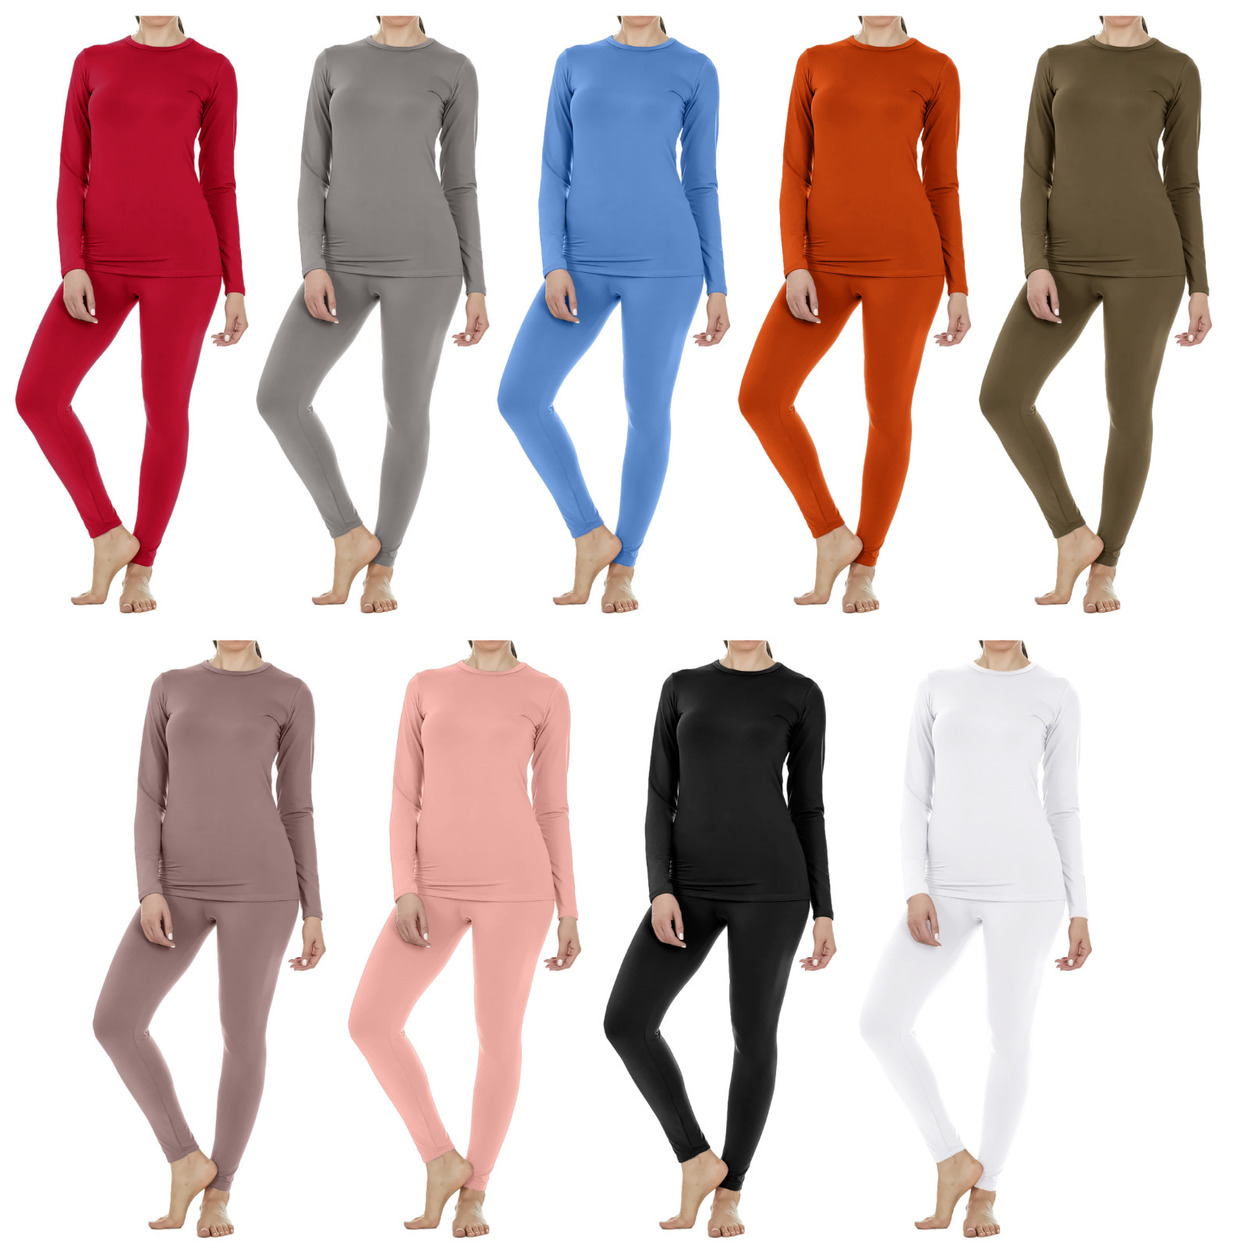 2-Set: Women's Fleece Lined Winter Warm Soft Thermal Sets For Cold Weather - Black&blue, Small